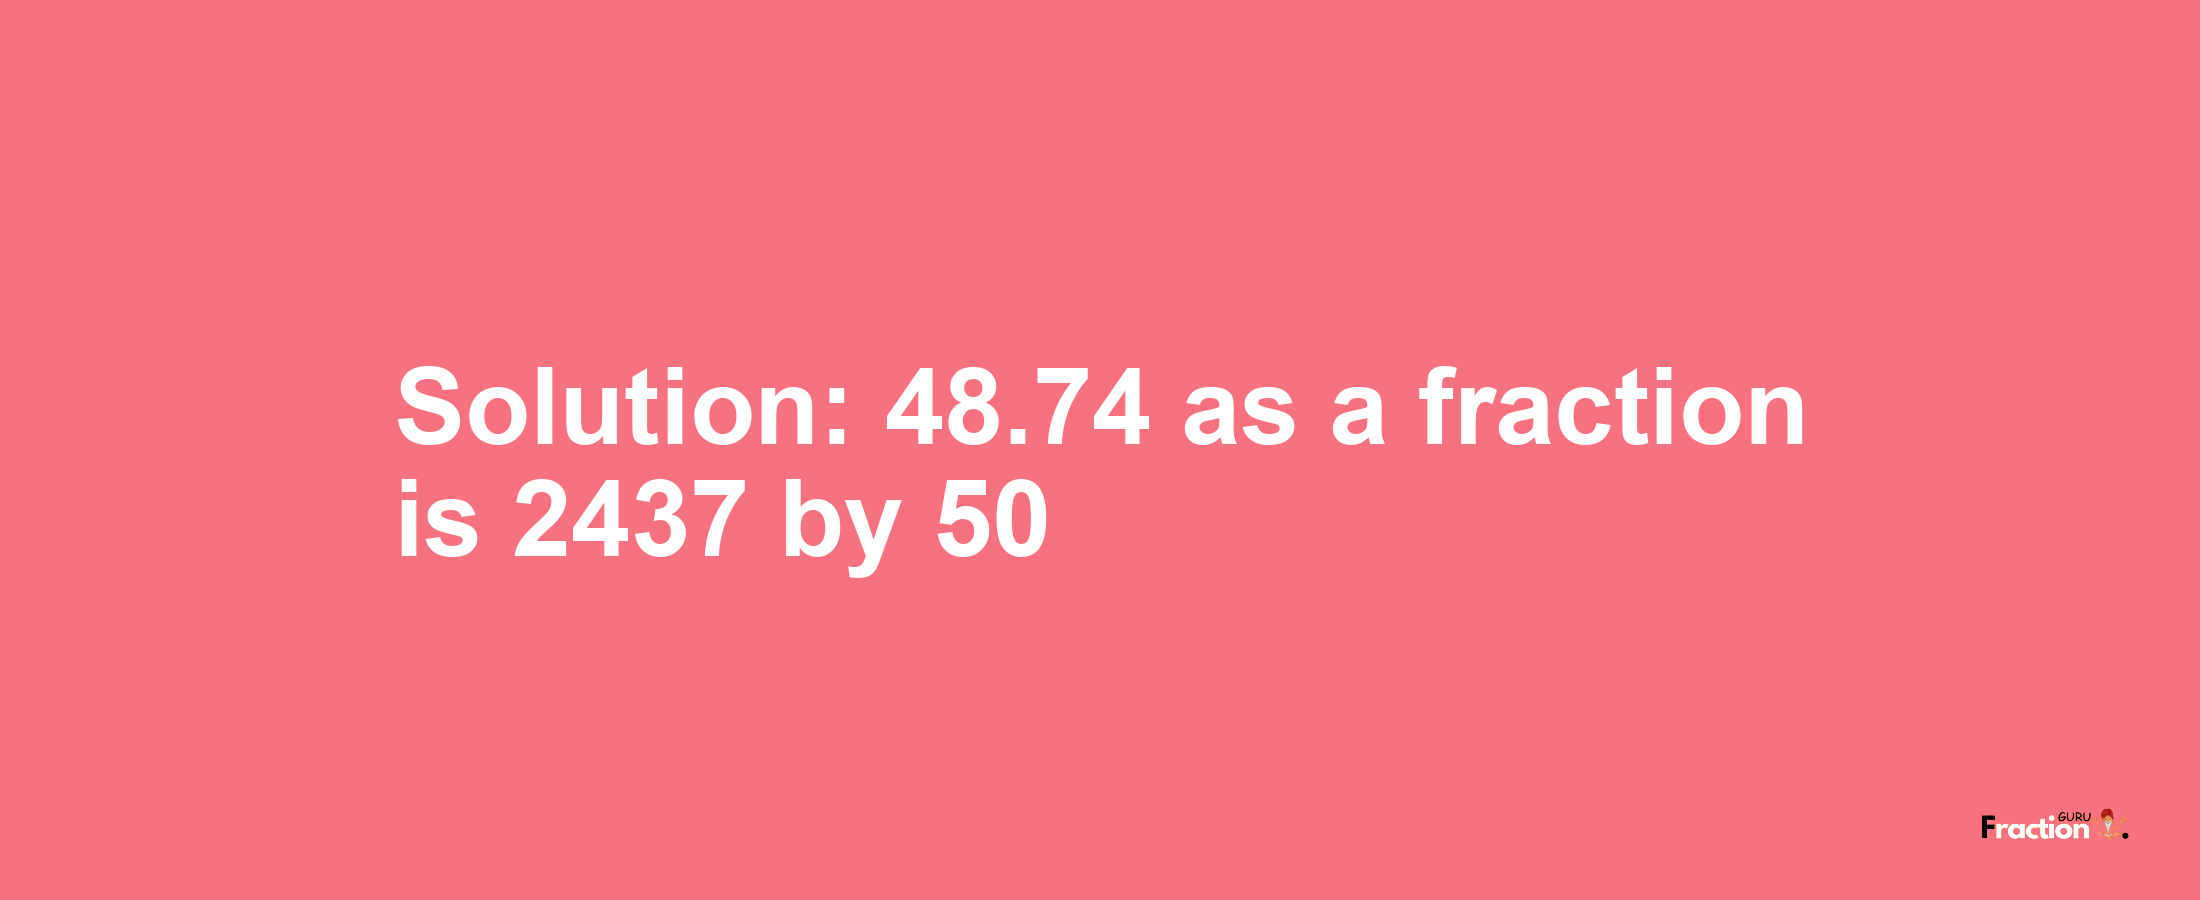 Solution:48.74 as a fraction is 2437/50